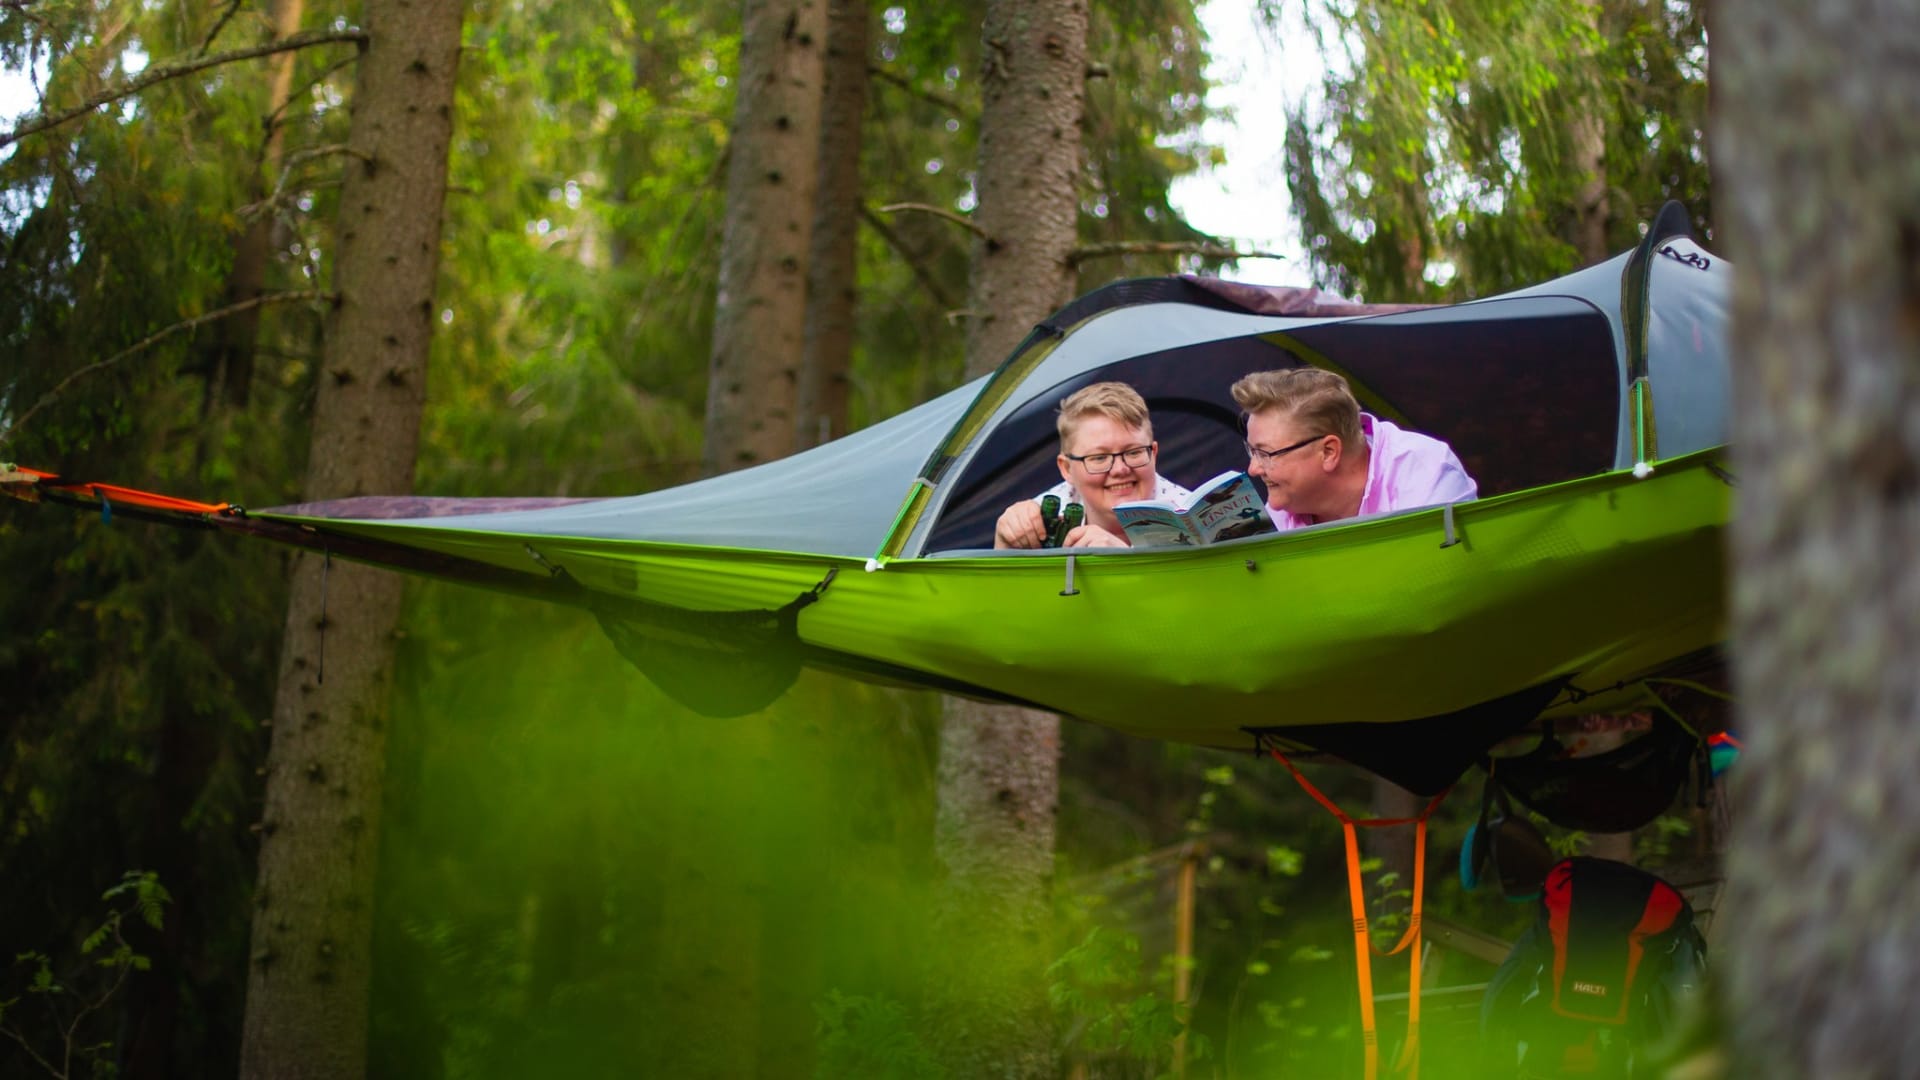 It is wonderful to relax in the Tentsile tree tent glamping site of Kommee Kurki